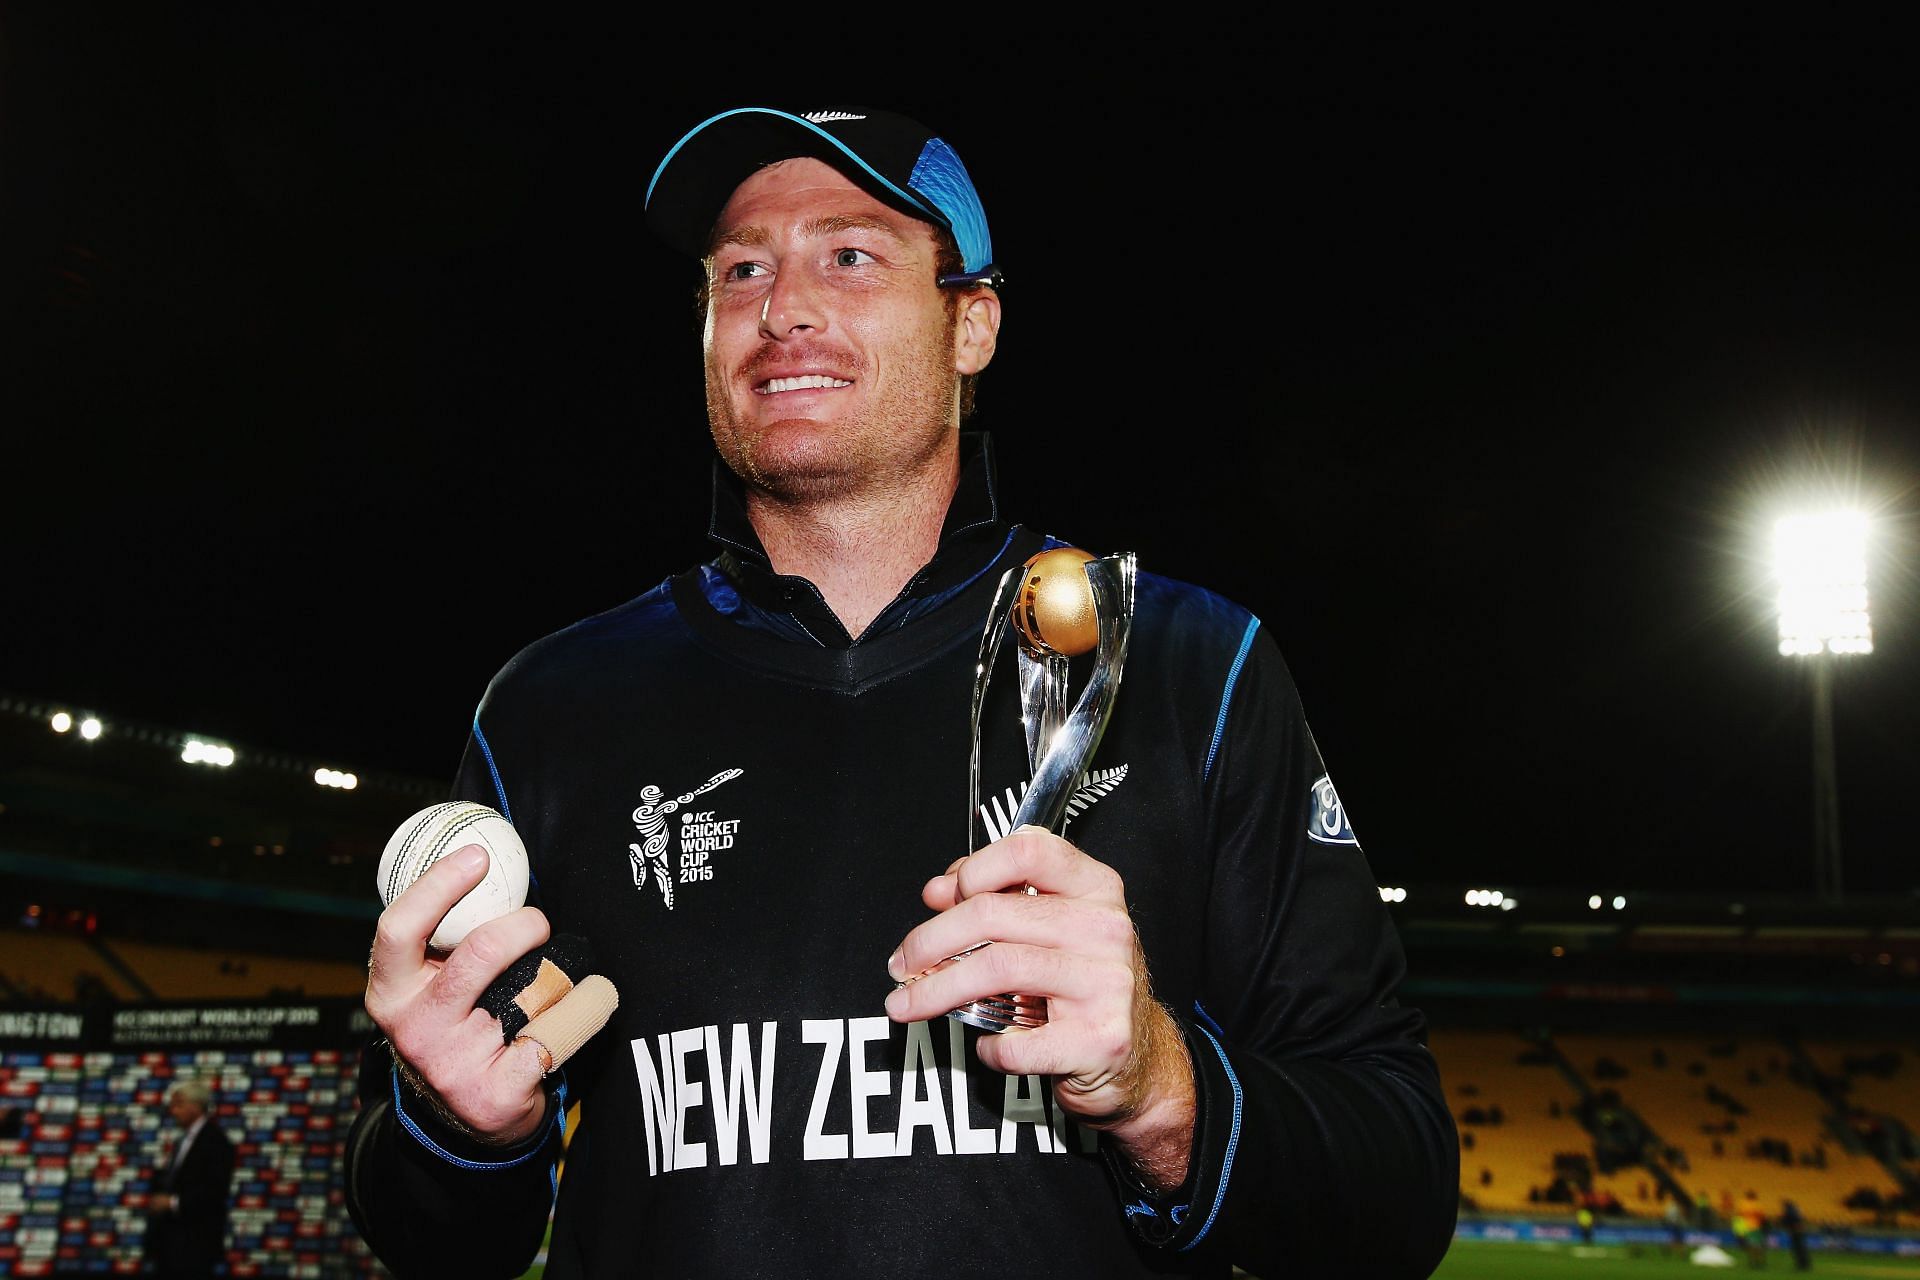 New Zealand v West Indies: Quarter Final - 2015 ICC Cricket World Cup (Image: Getty)